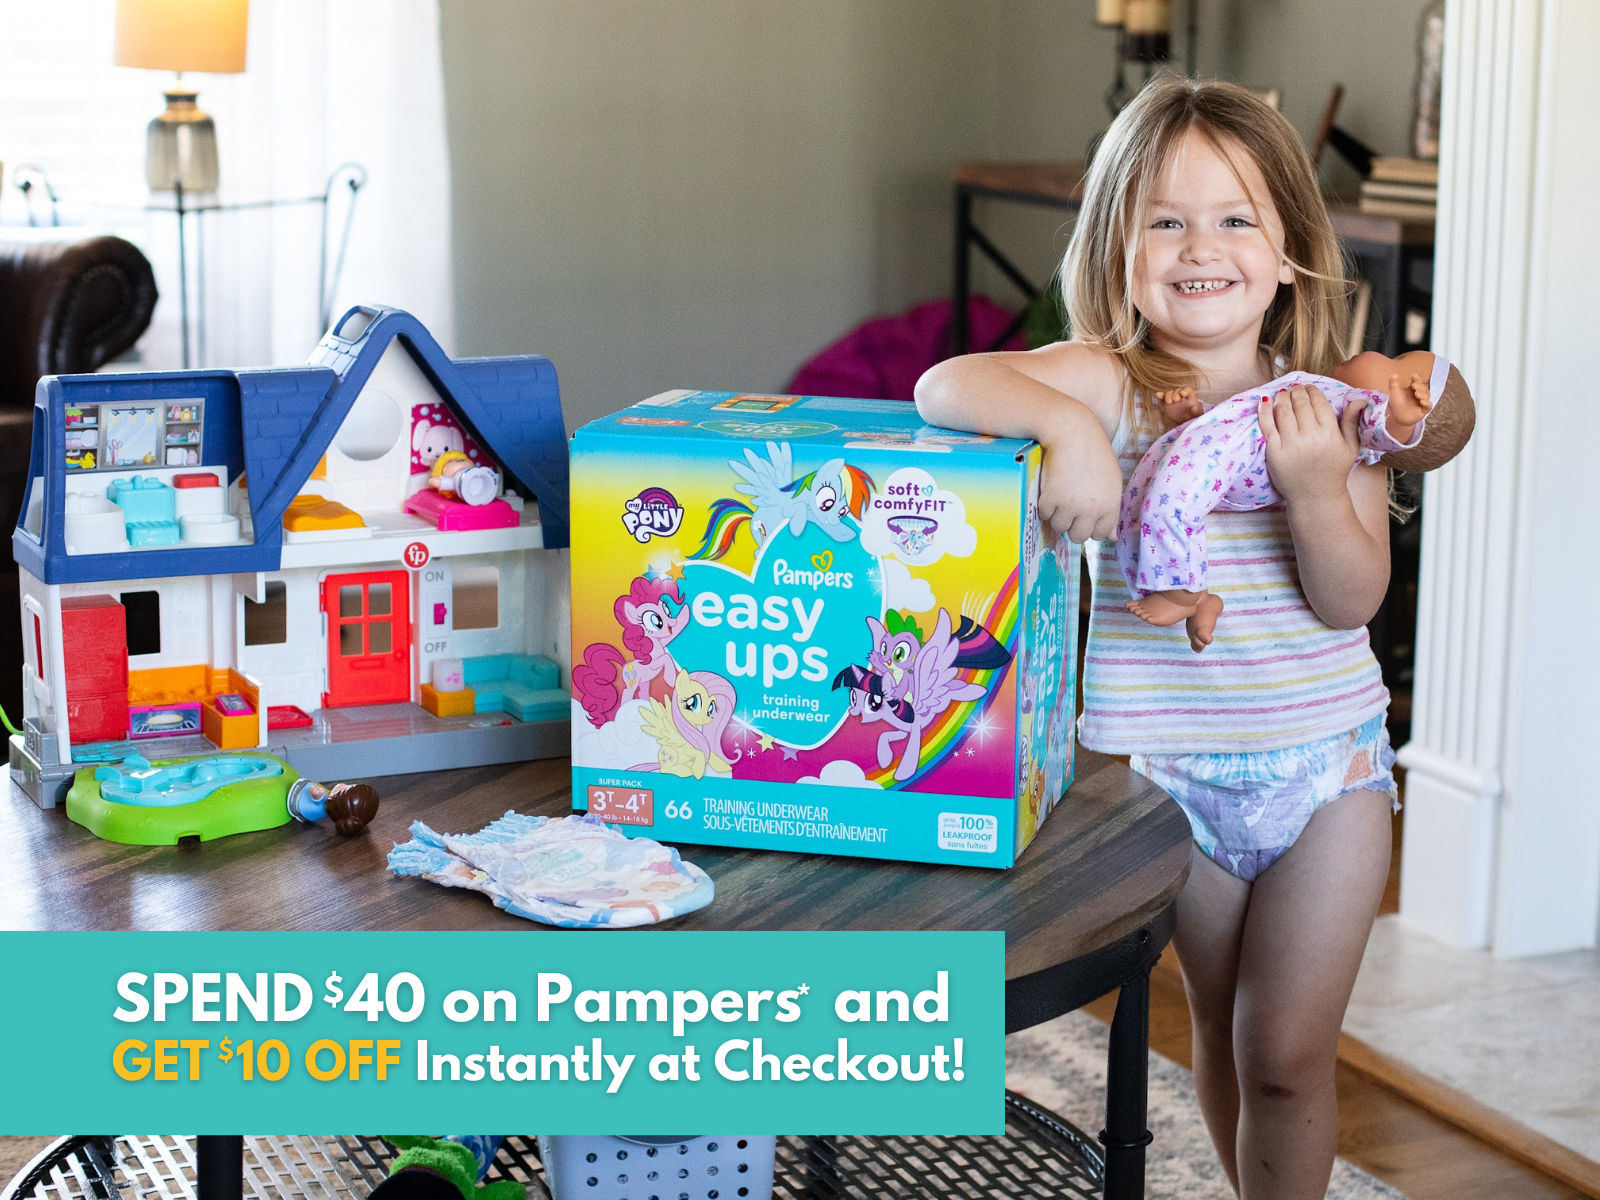 Still Time To Grab $10 In Savings – Stock Up On Pampers, Easy Ups